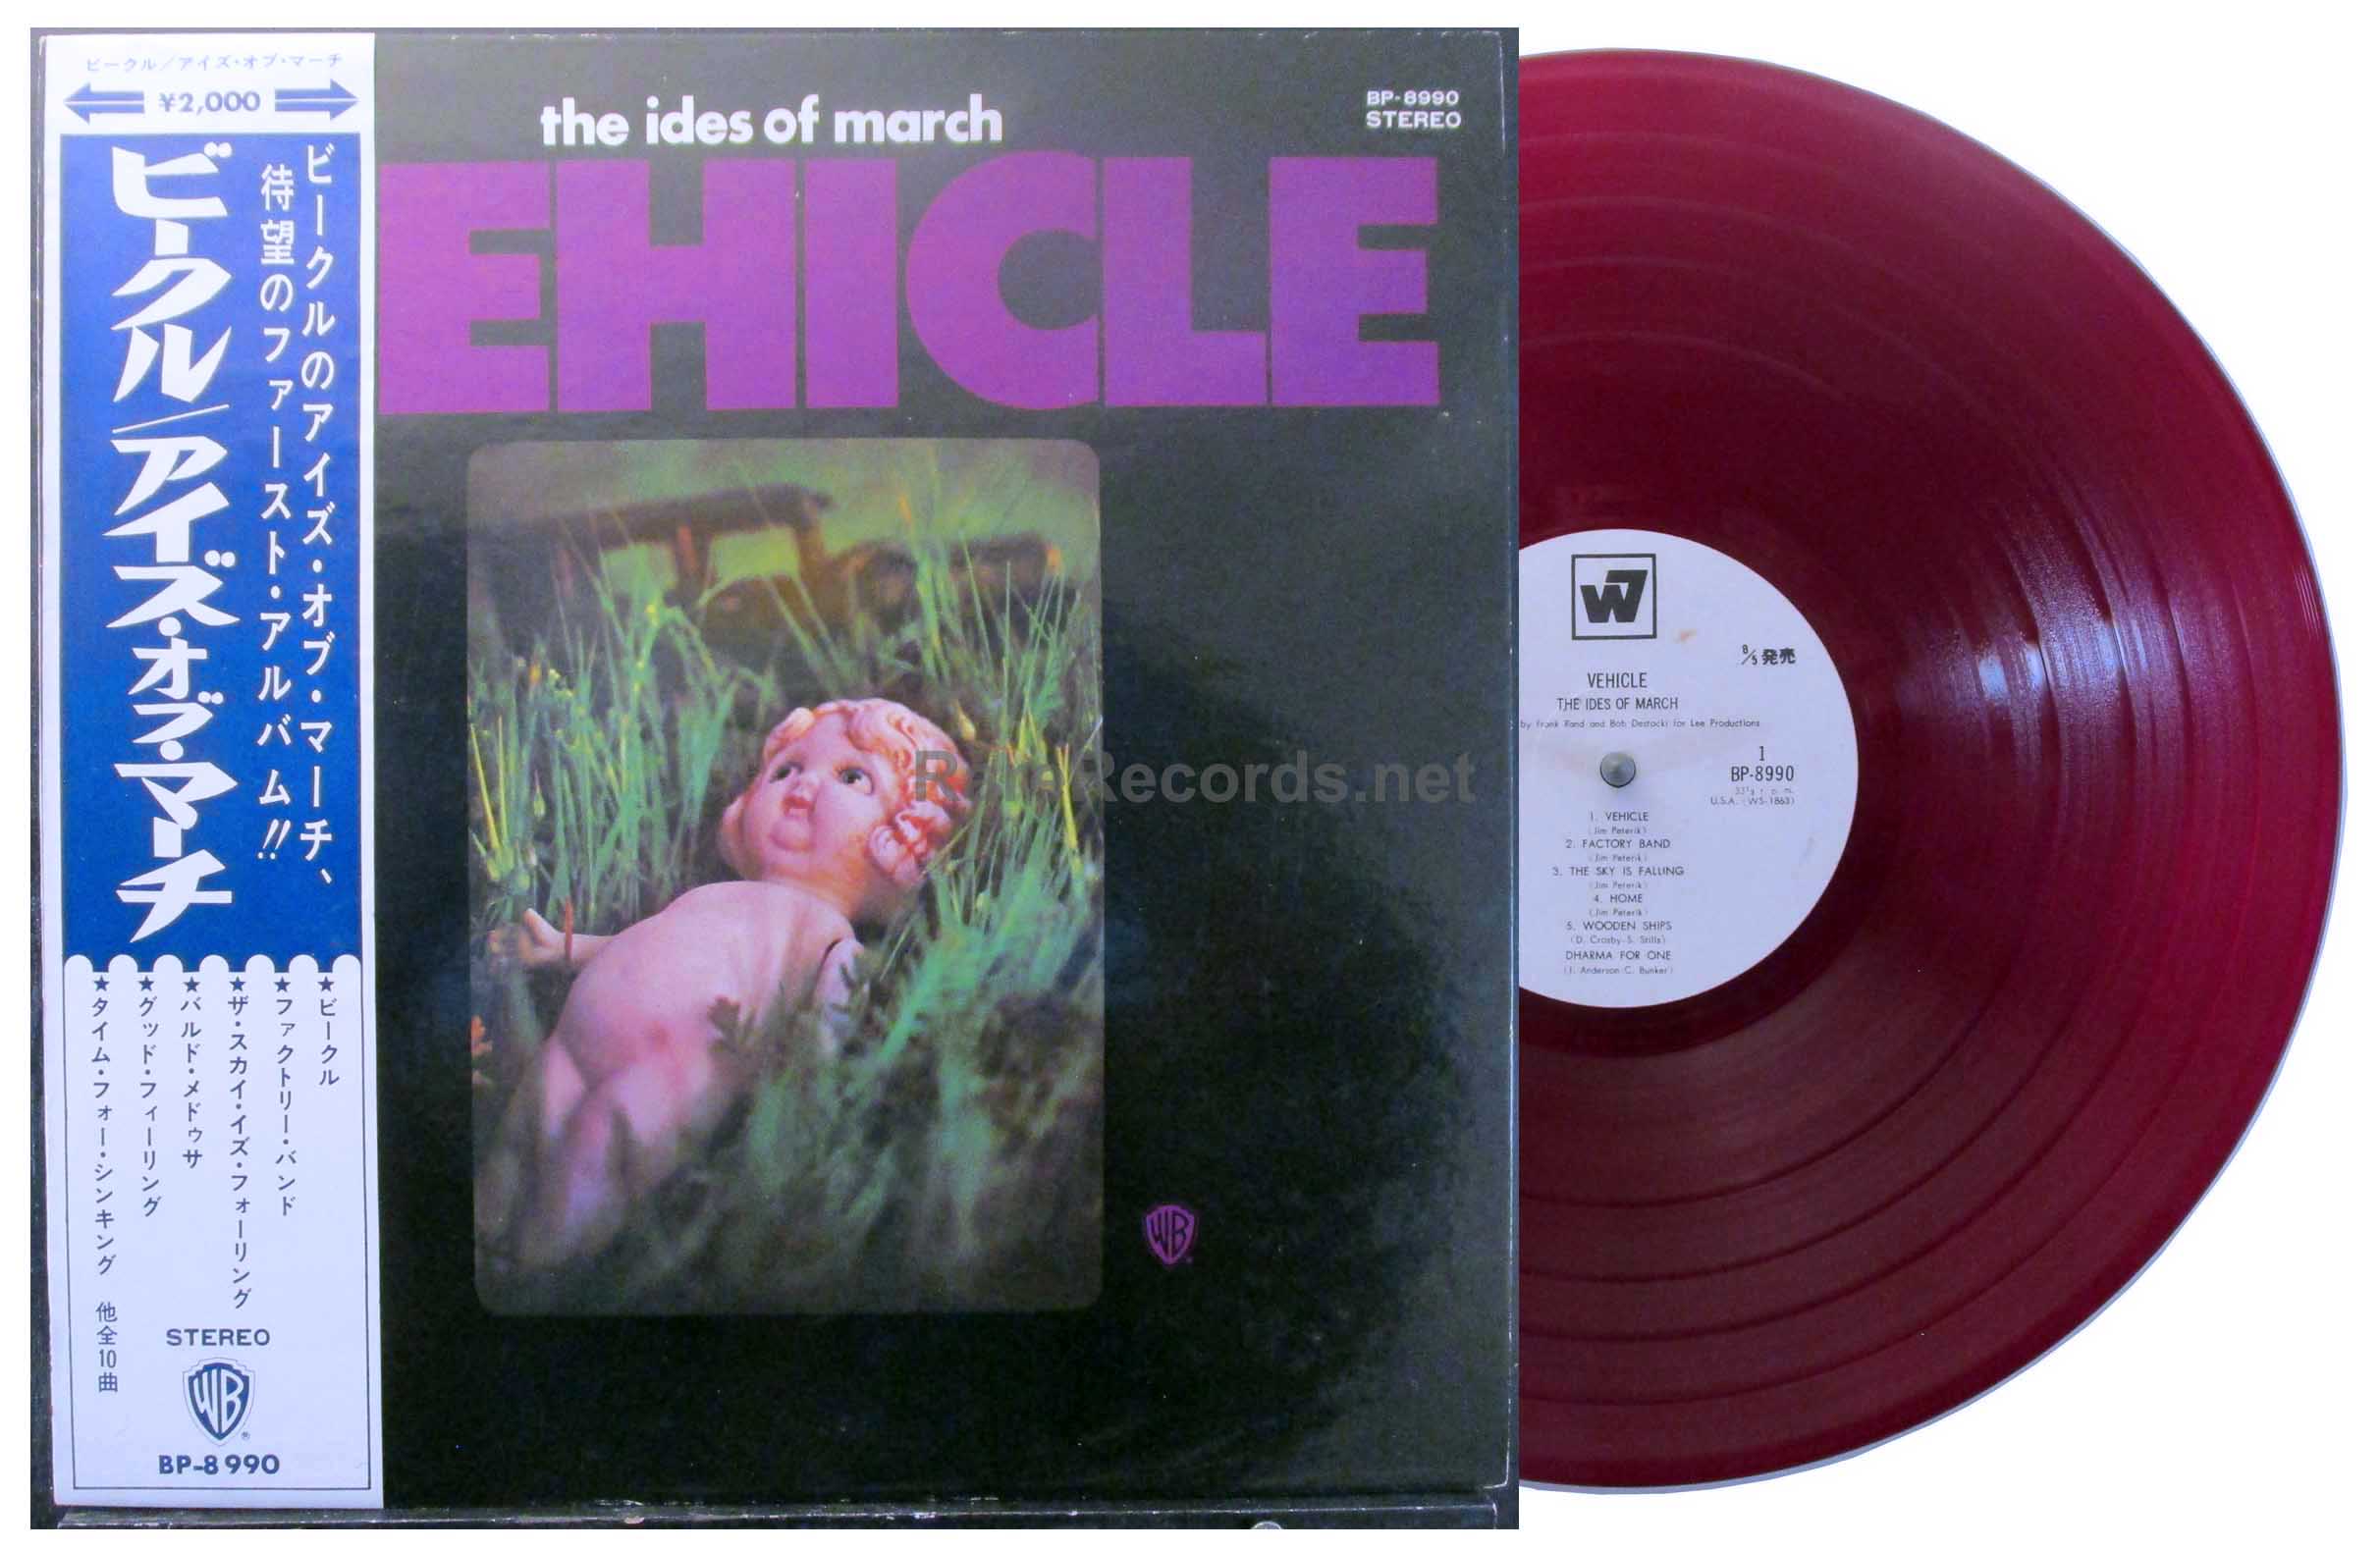 Ides of March - Vehicle 1970 red vinyl Japan promotional LP with obi